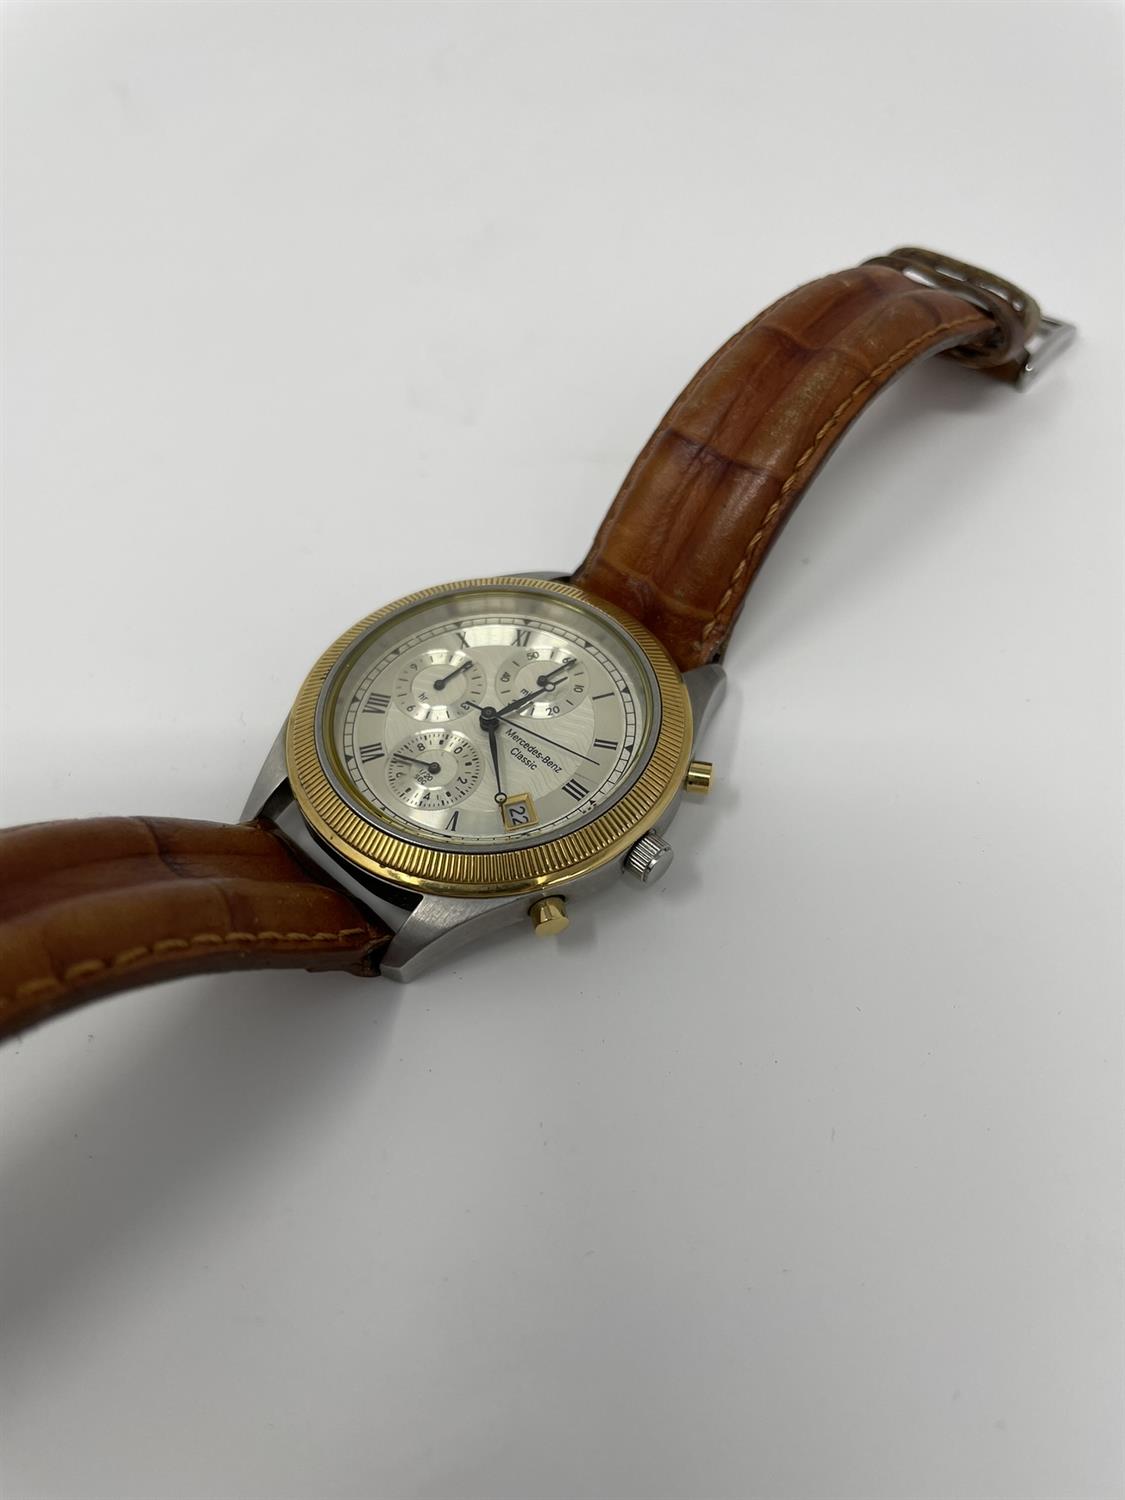 Mercedes-Benz Classic Chronograph - Image 10 of 10